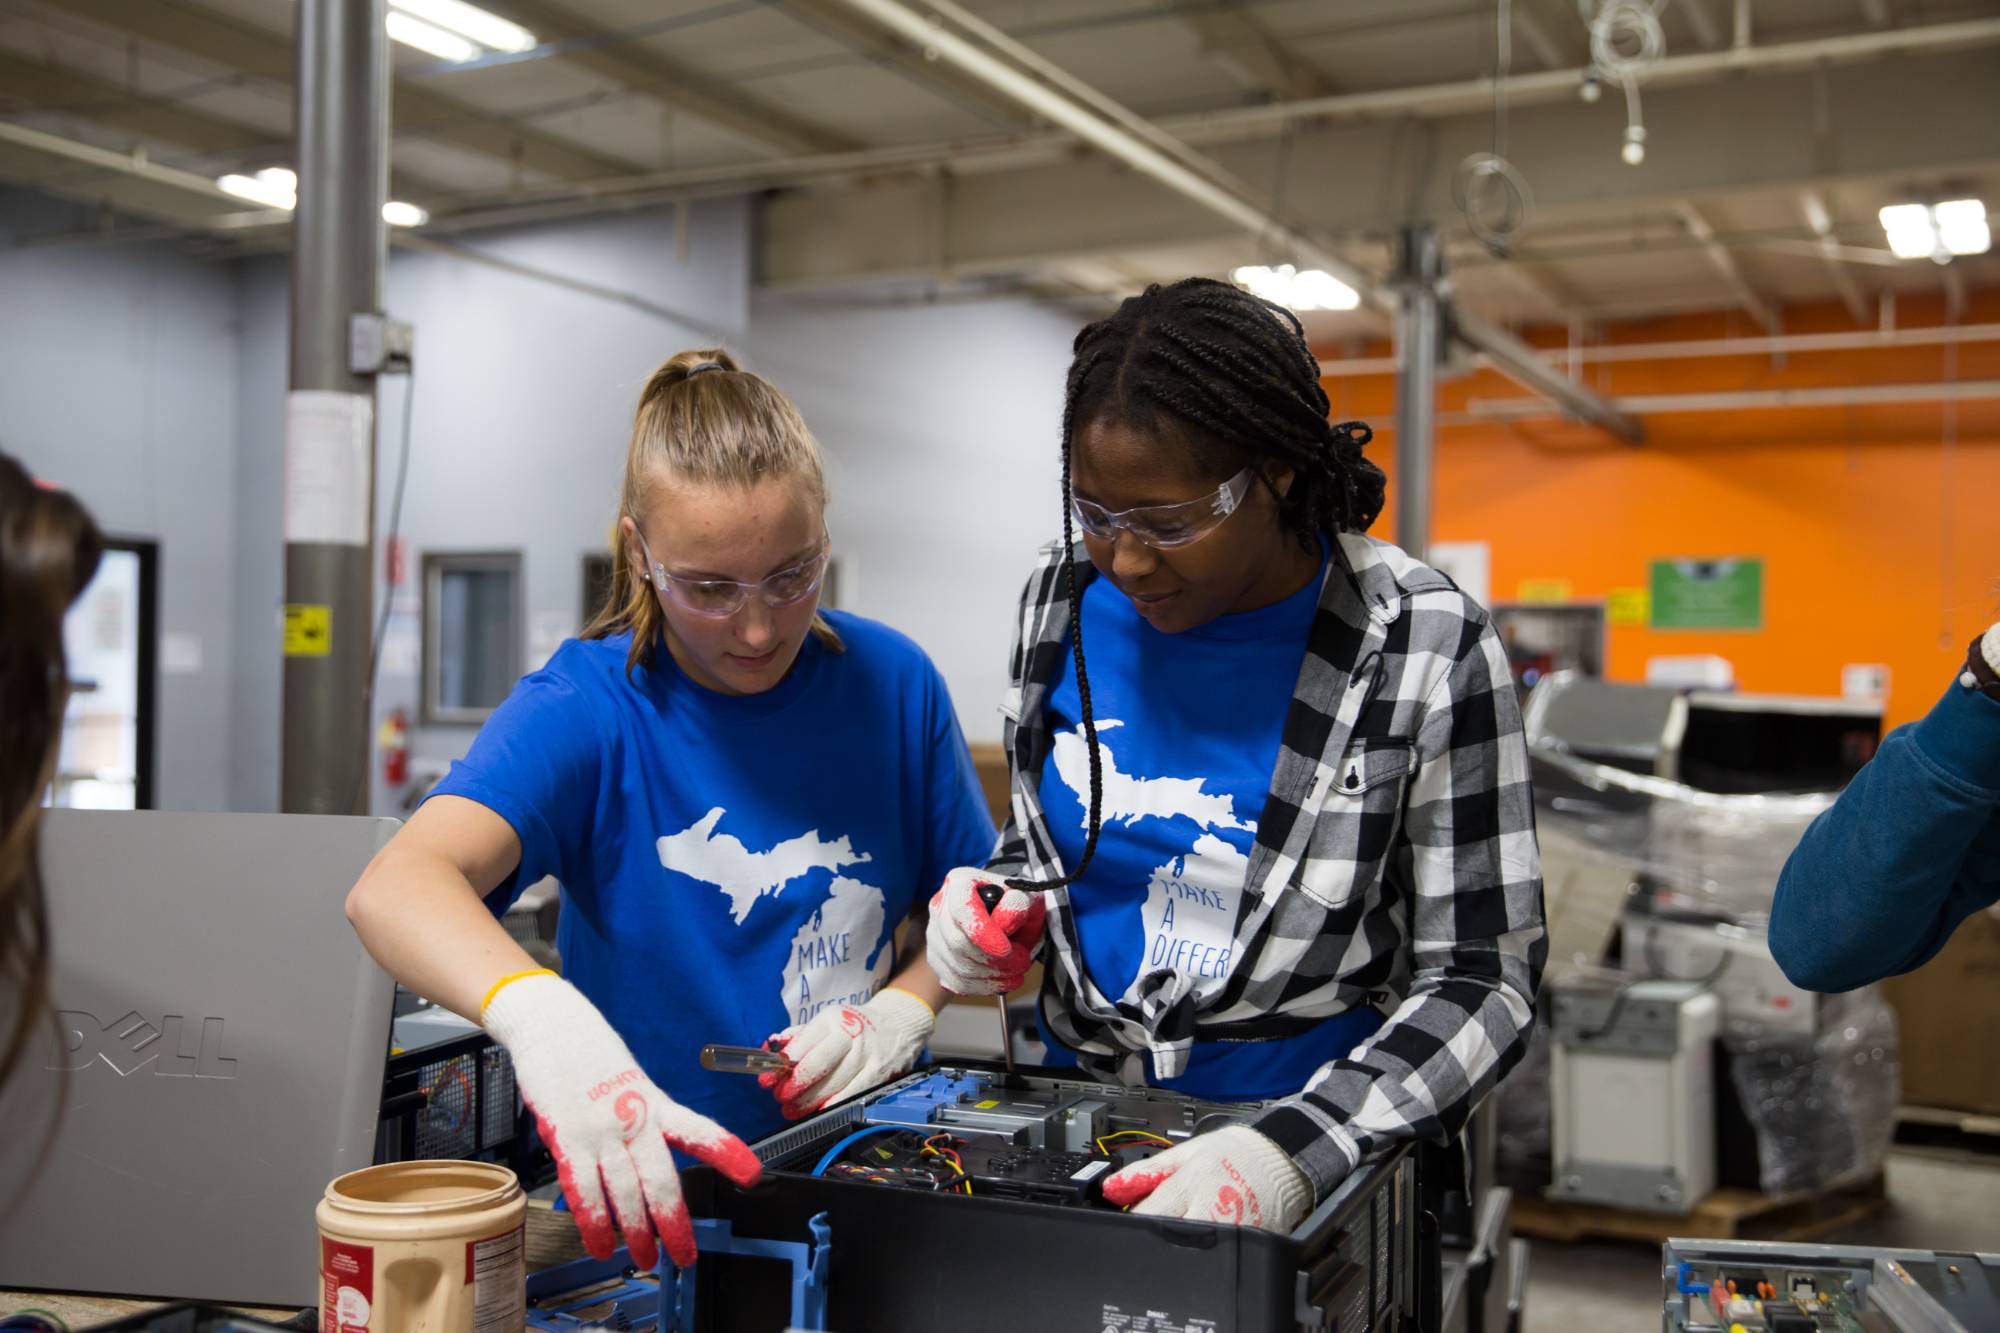 Two students wearing blue shirts working to take a part of a computer wearing safety clear goggles and white gloves